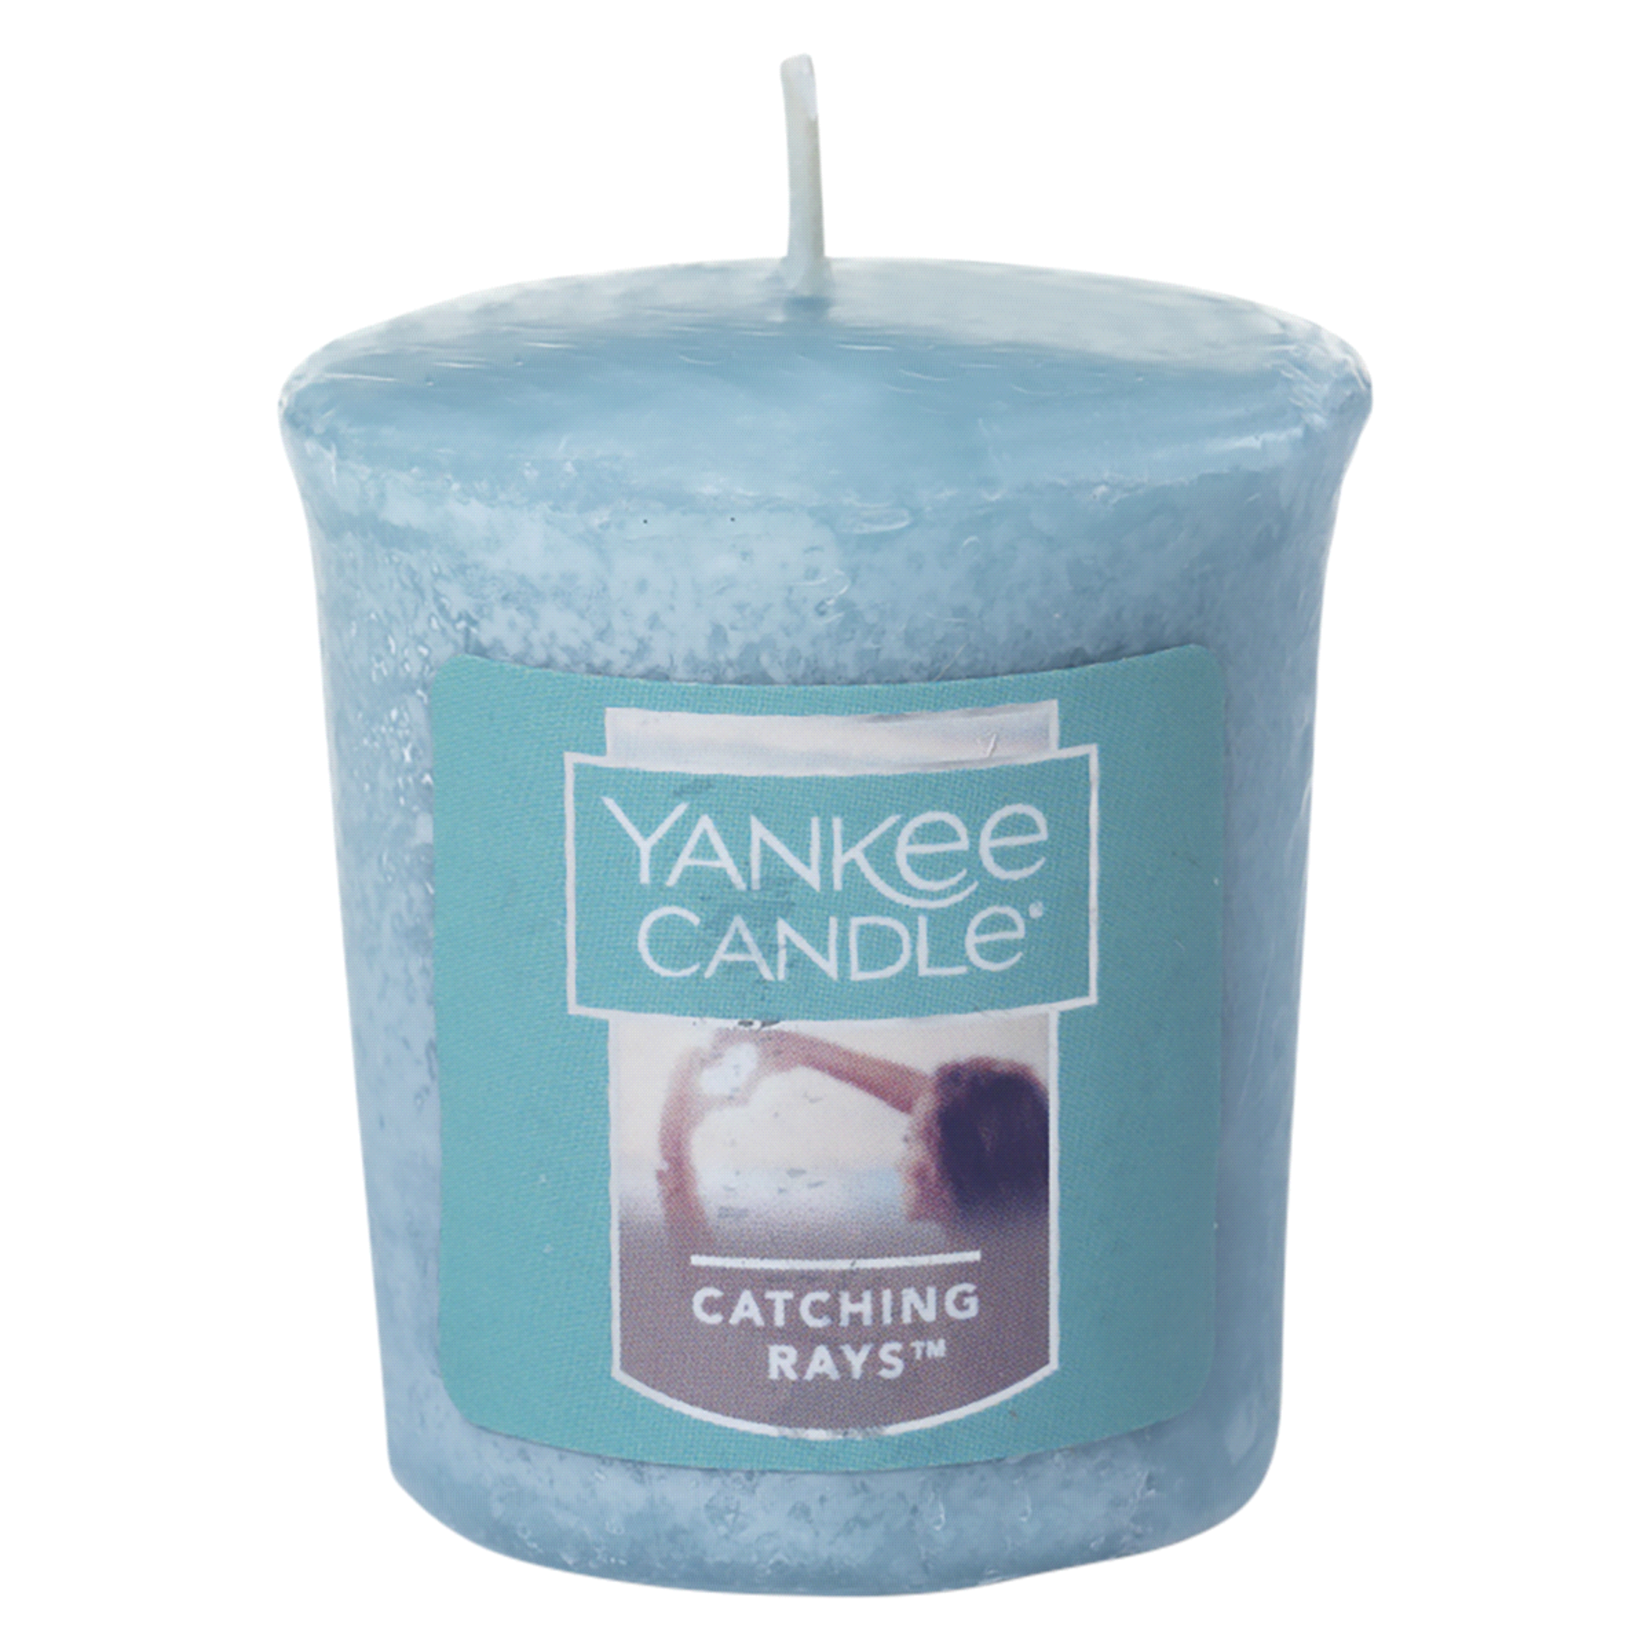 Yankee Candles Yankee Candles Catching Rays 1.75 oz